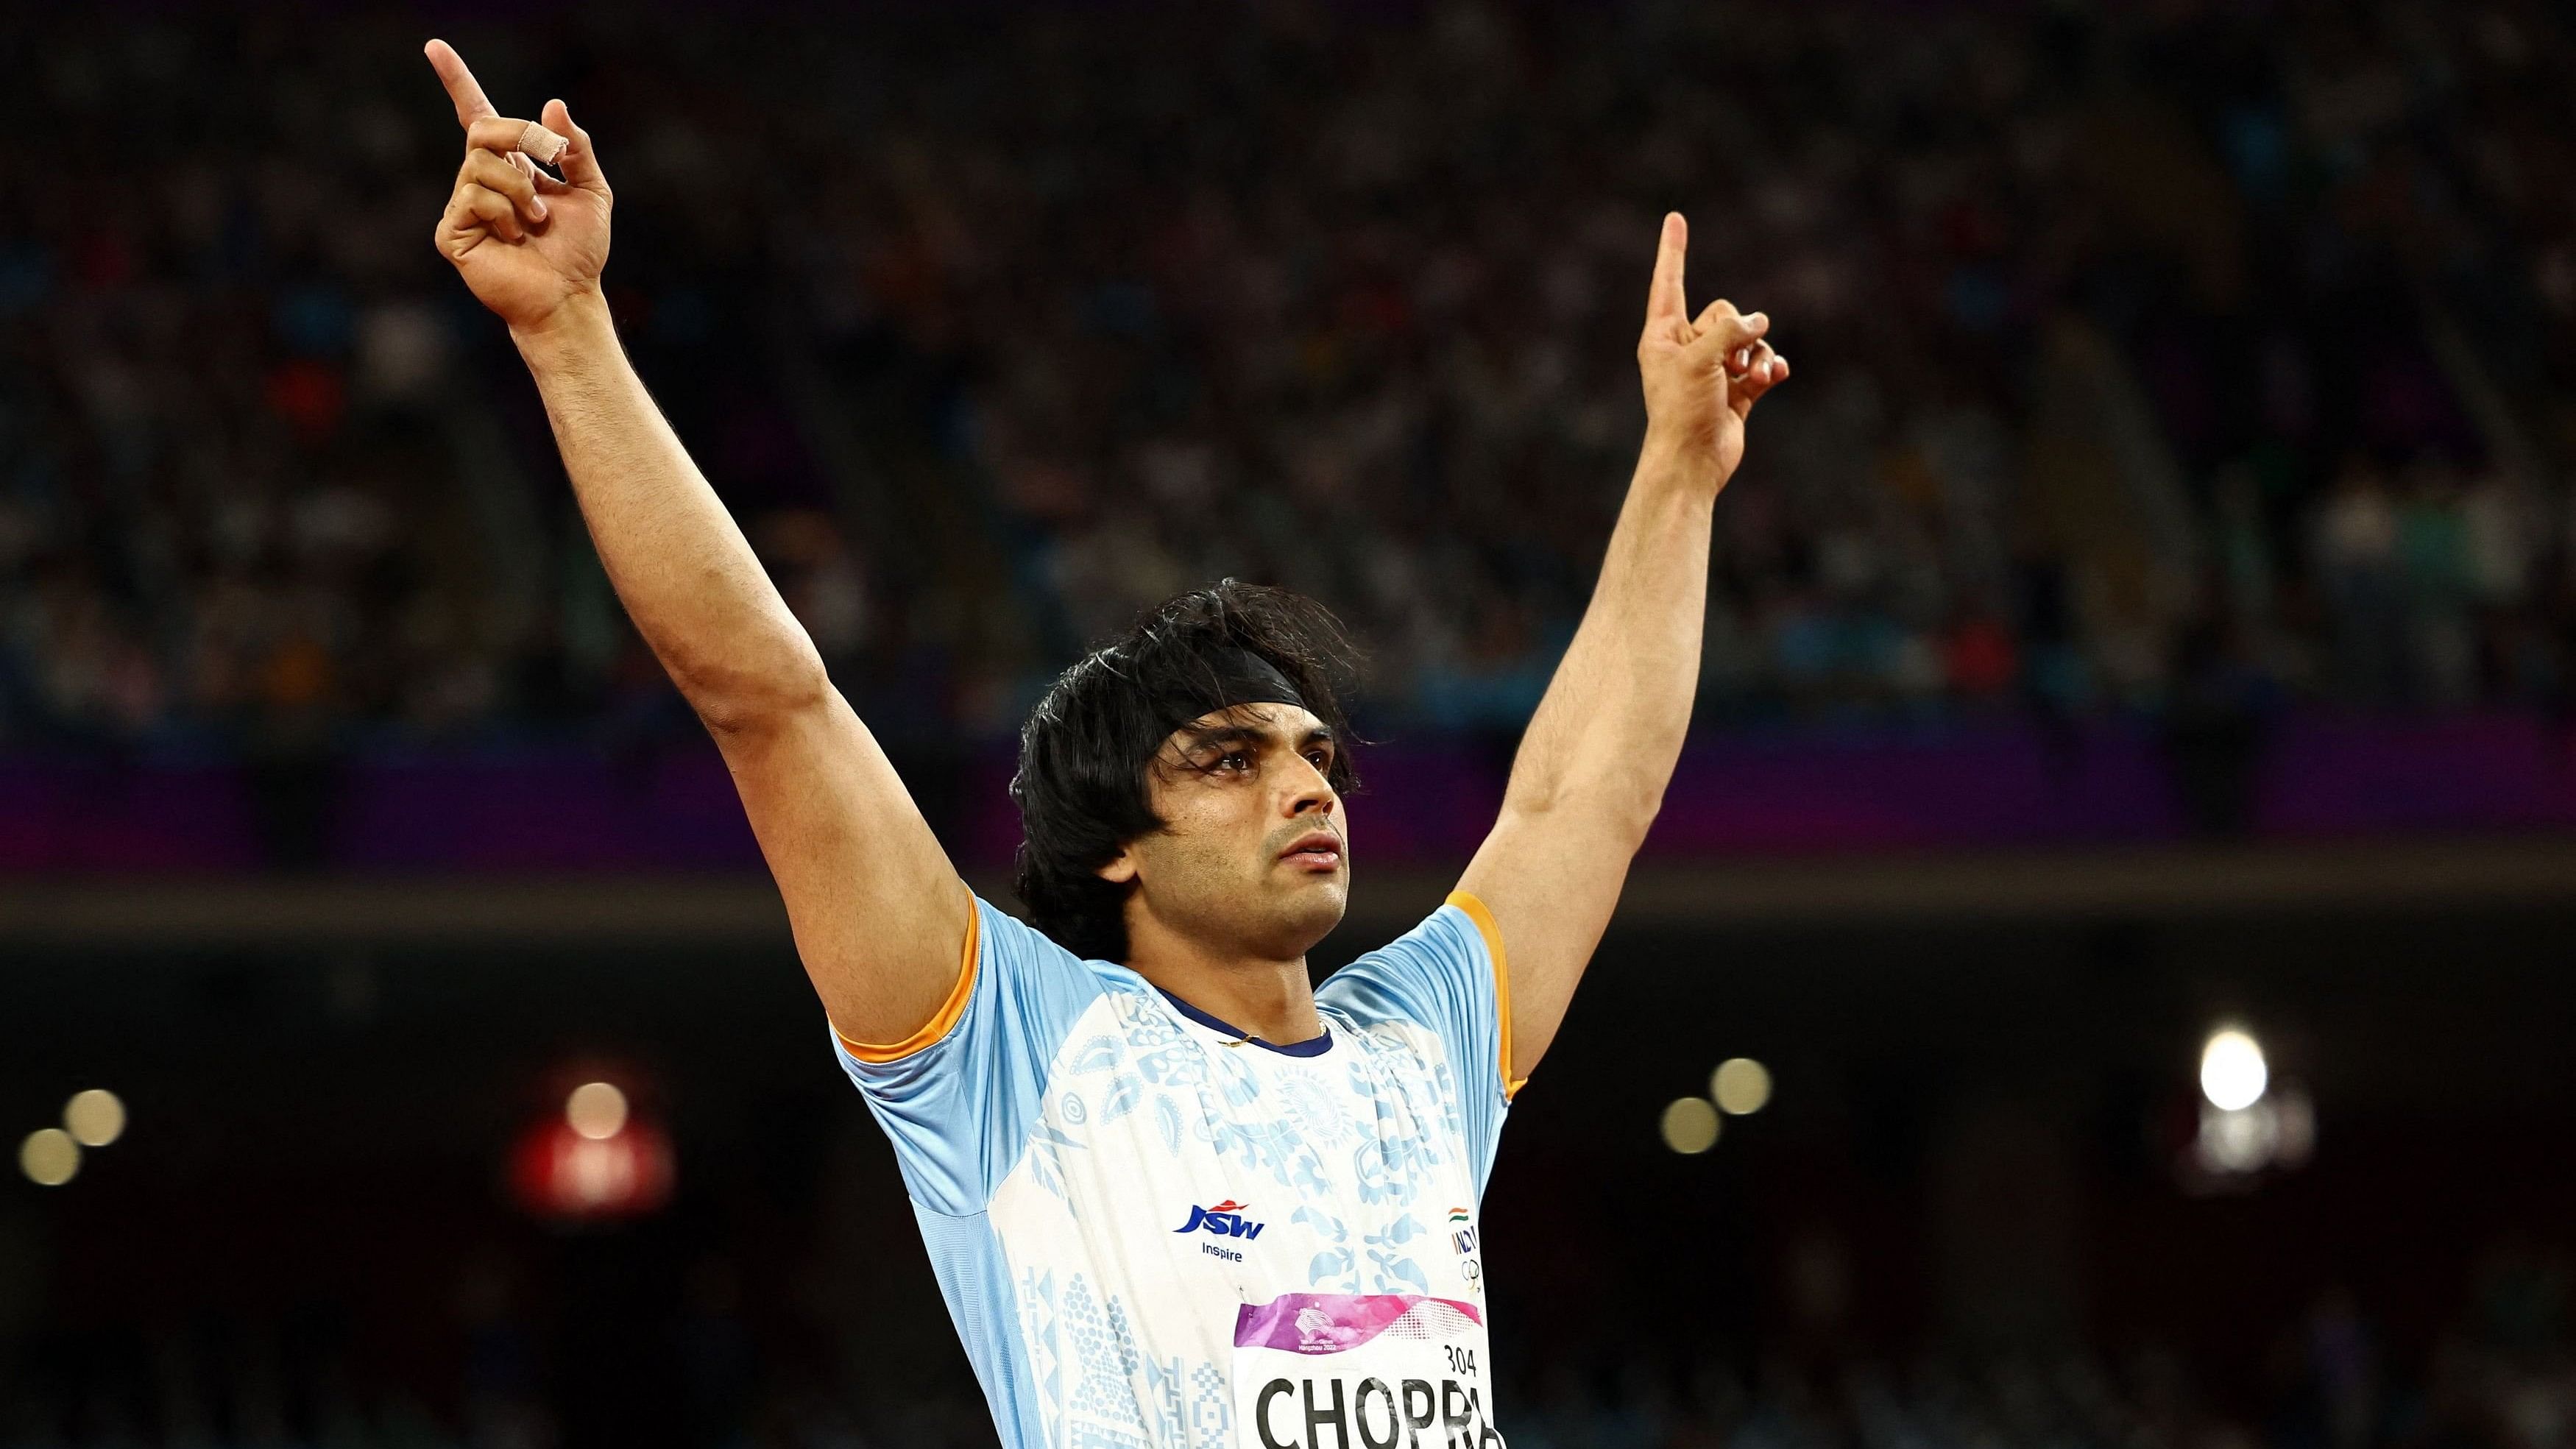 <div class="paragraphs"><p>Reigning Olympic javelin throw champion Neeraj Chopra remains India's biggest medal hope in Paris. </p></div>